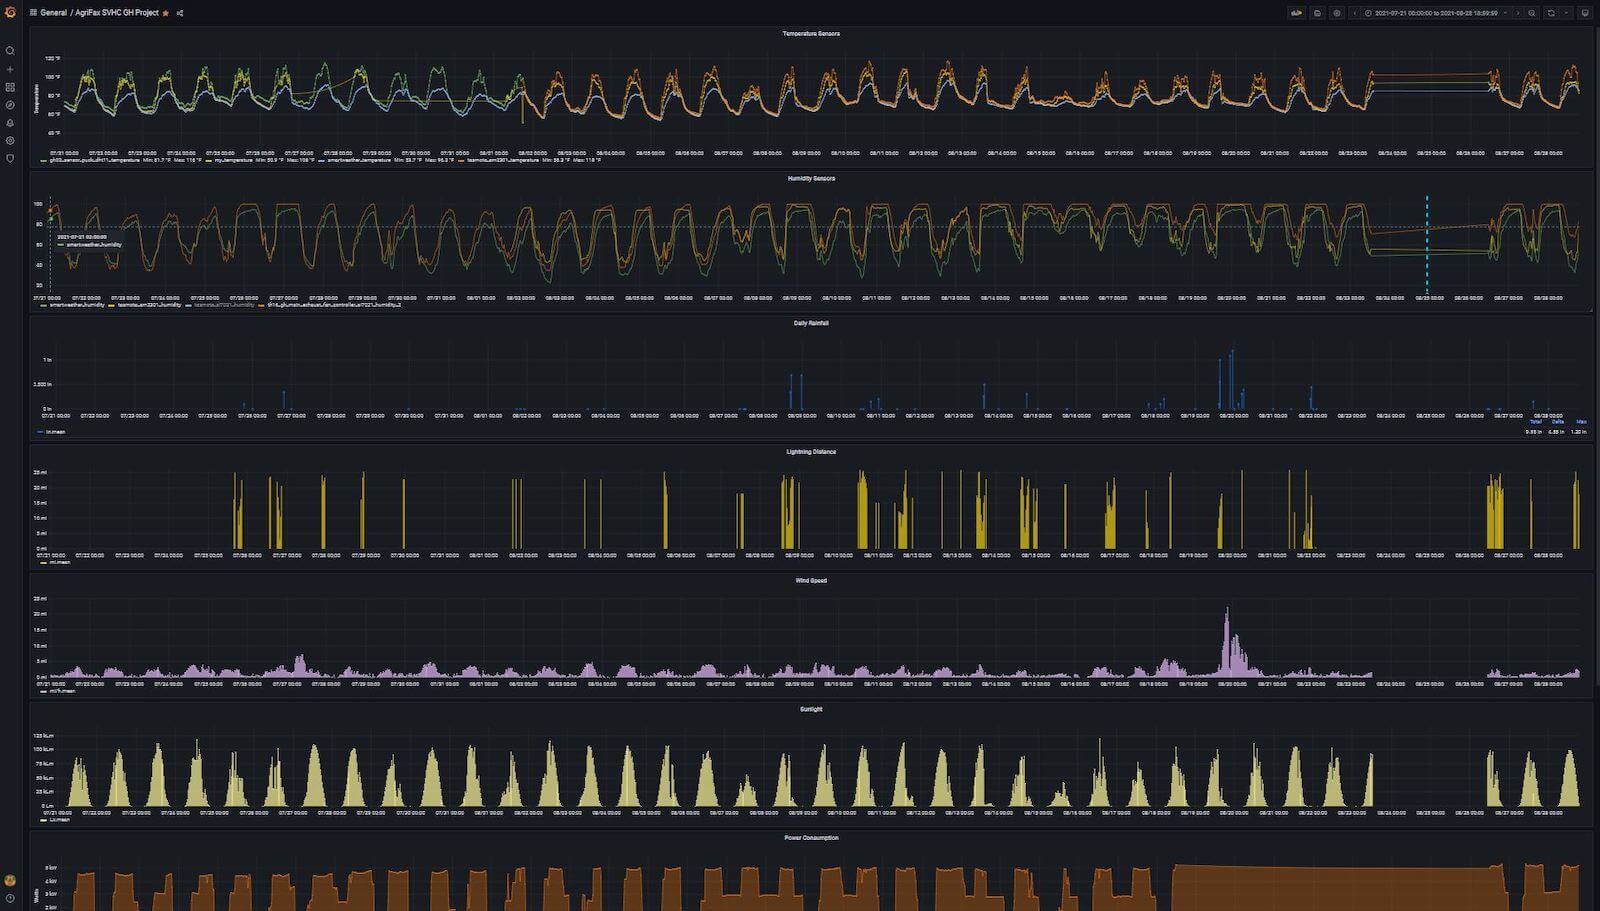 A Grafana dashboard created by Agritech showing 90 days of data from Pure Shenandoah's greenhouses.